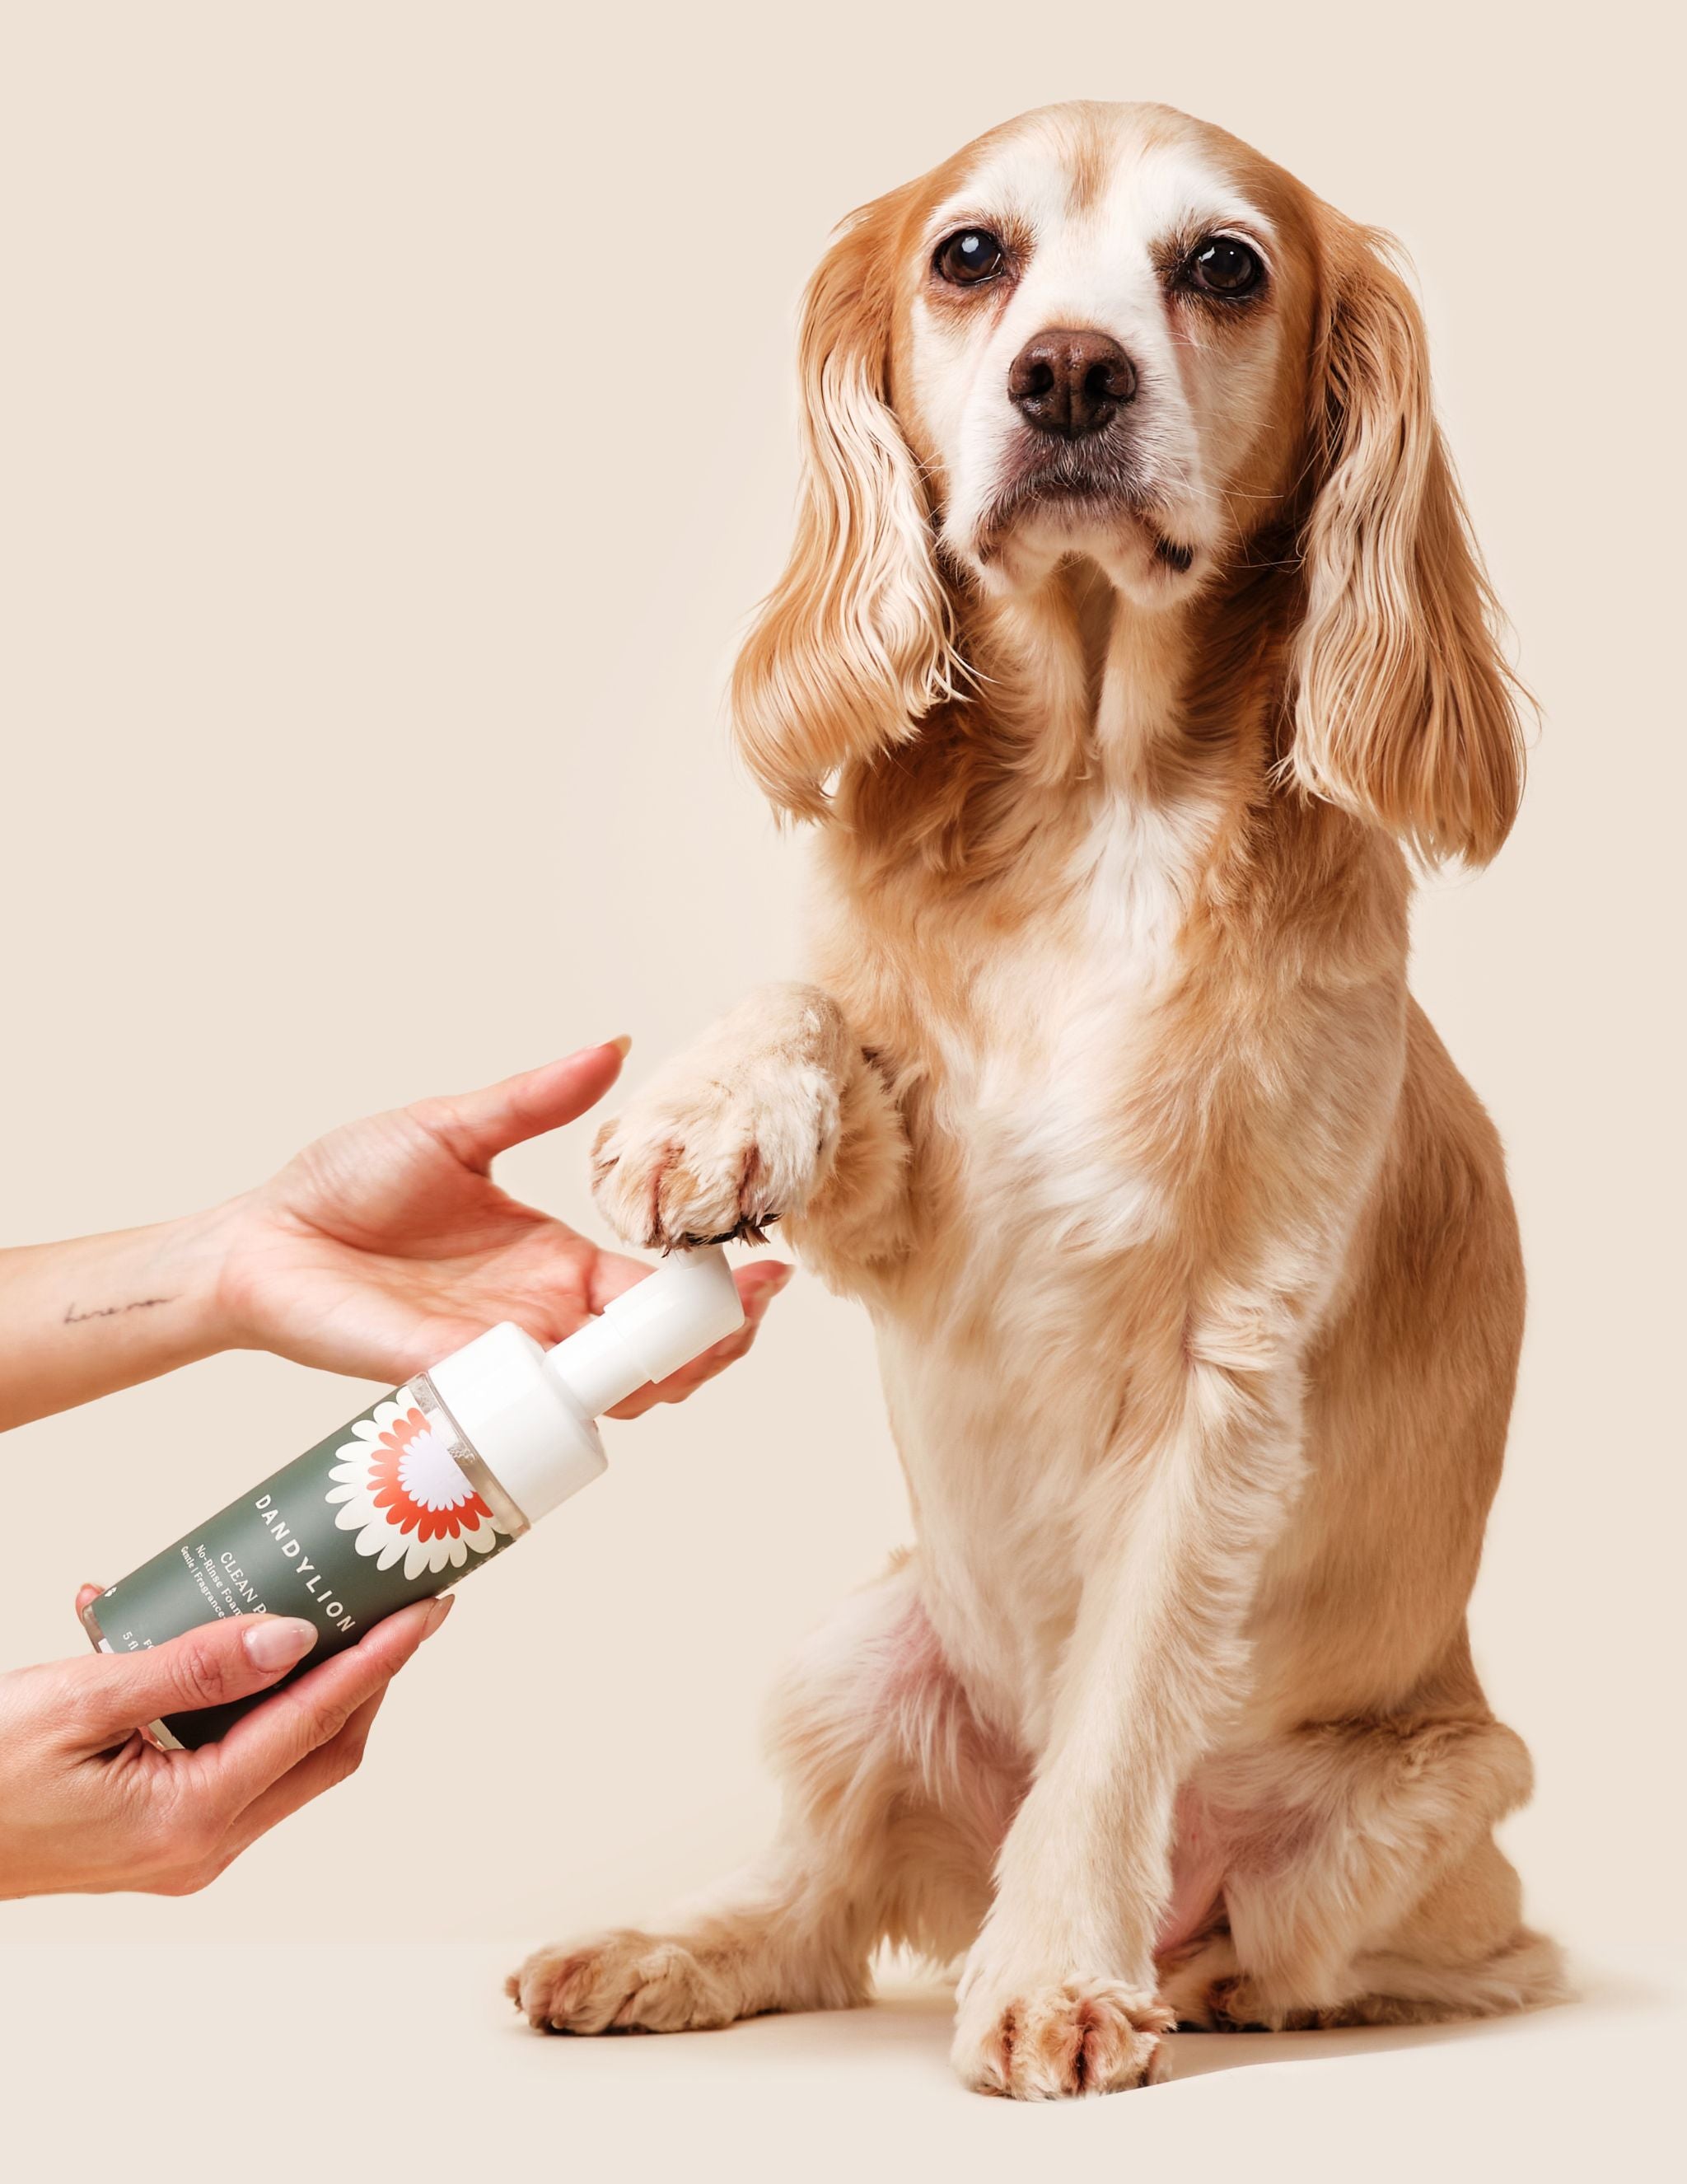 Dog Paw Cleaner  Klean Paws - Non-toxic Foaming